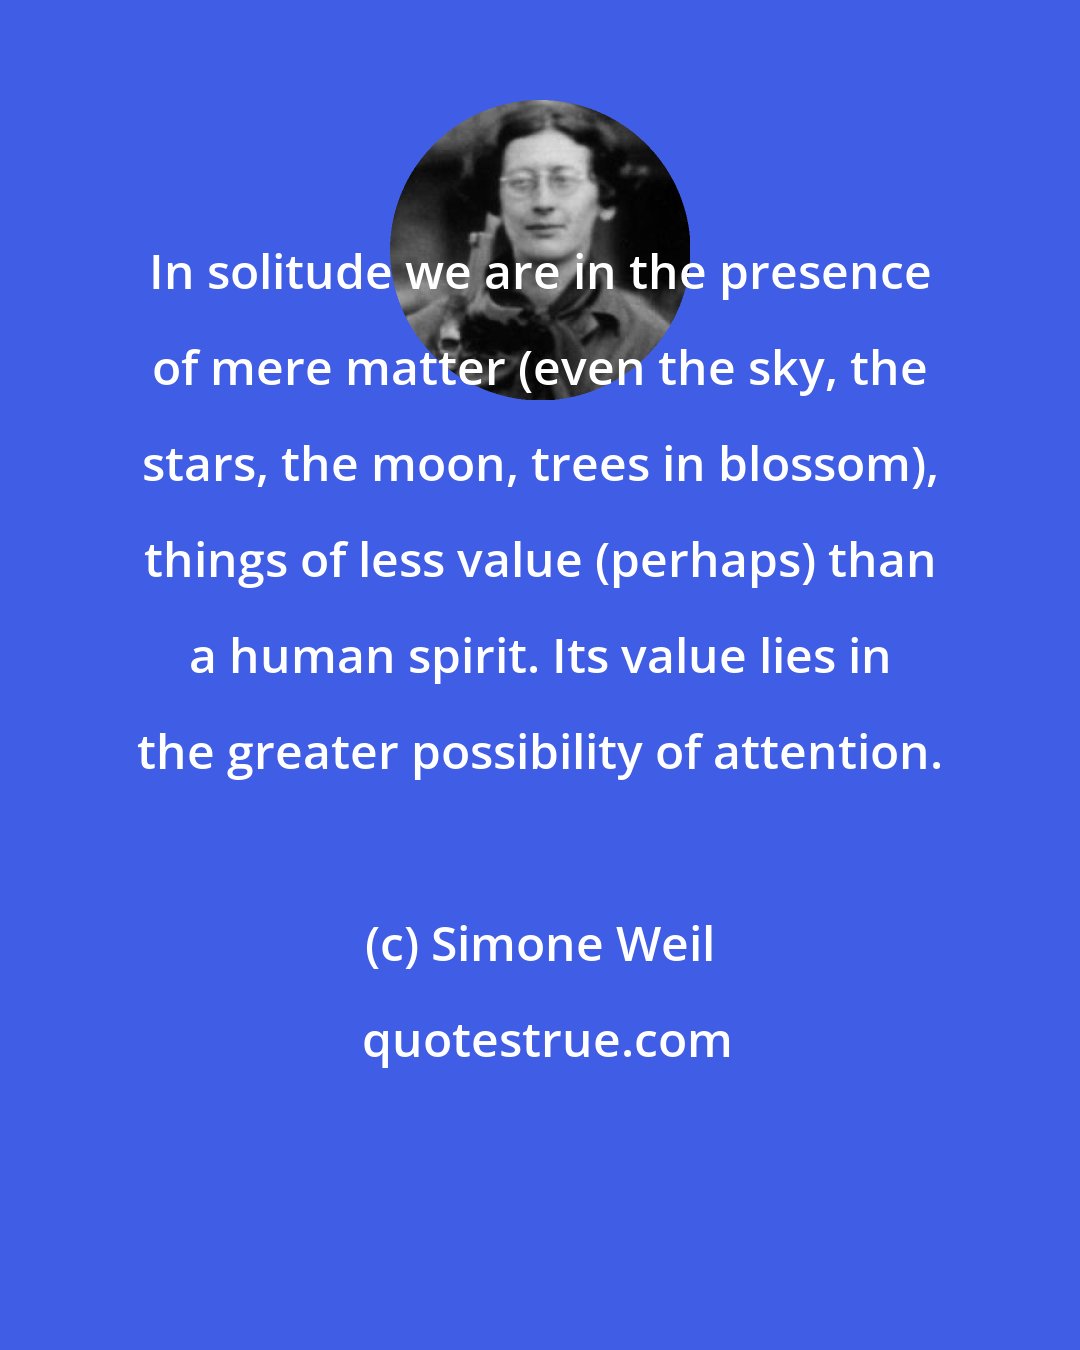 Simone Weil: In solitude we are in the presence of mere matter (even the sky, the stars, the moon, trees in blossom), things of less value (perhaps) than a human spirit. Its value lies in the greater possibility of attention.